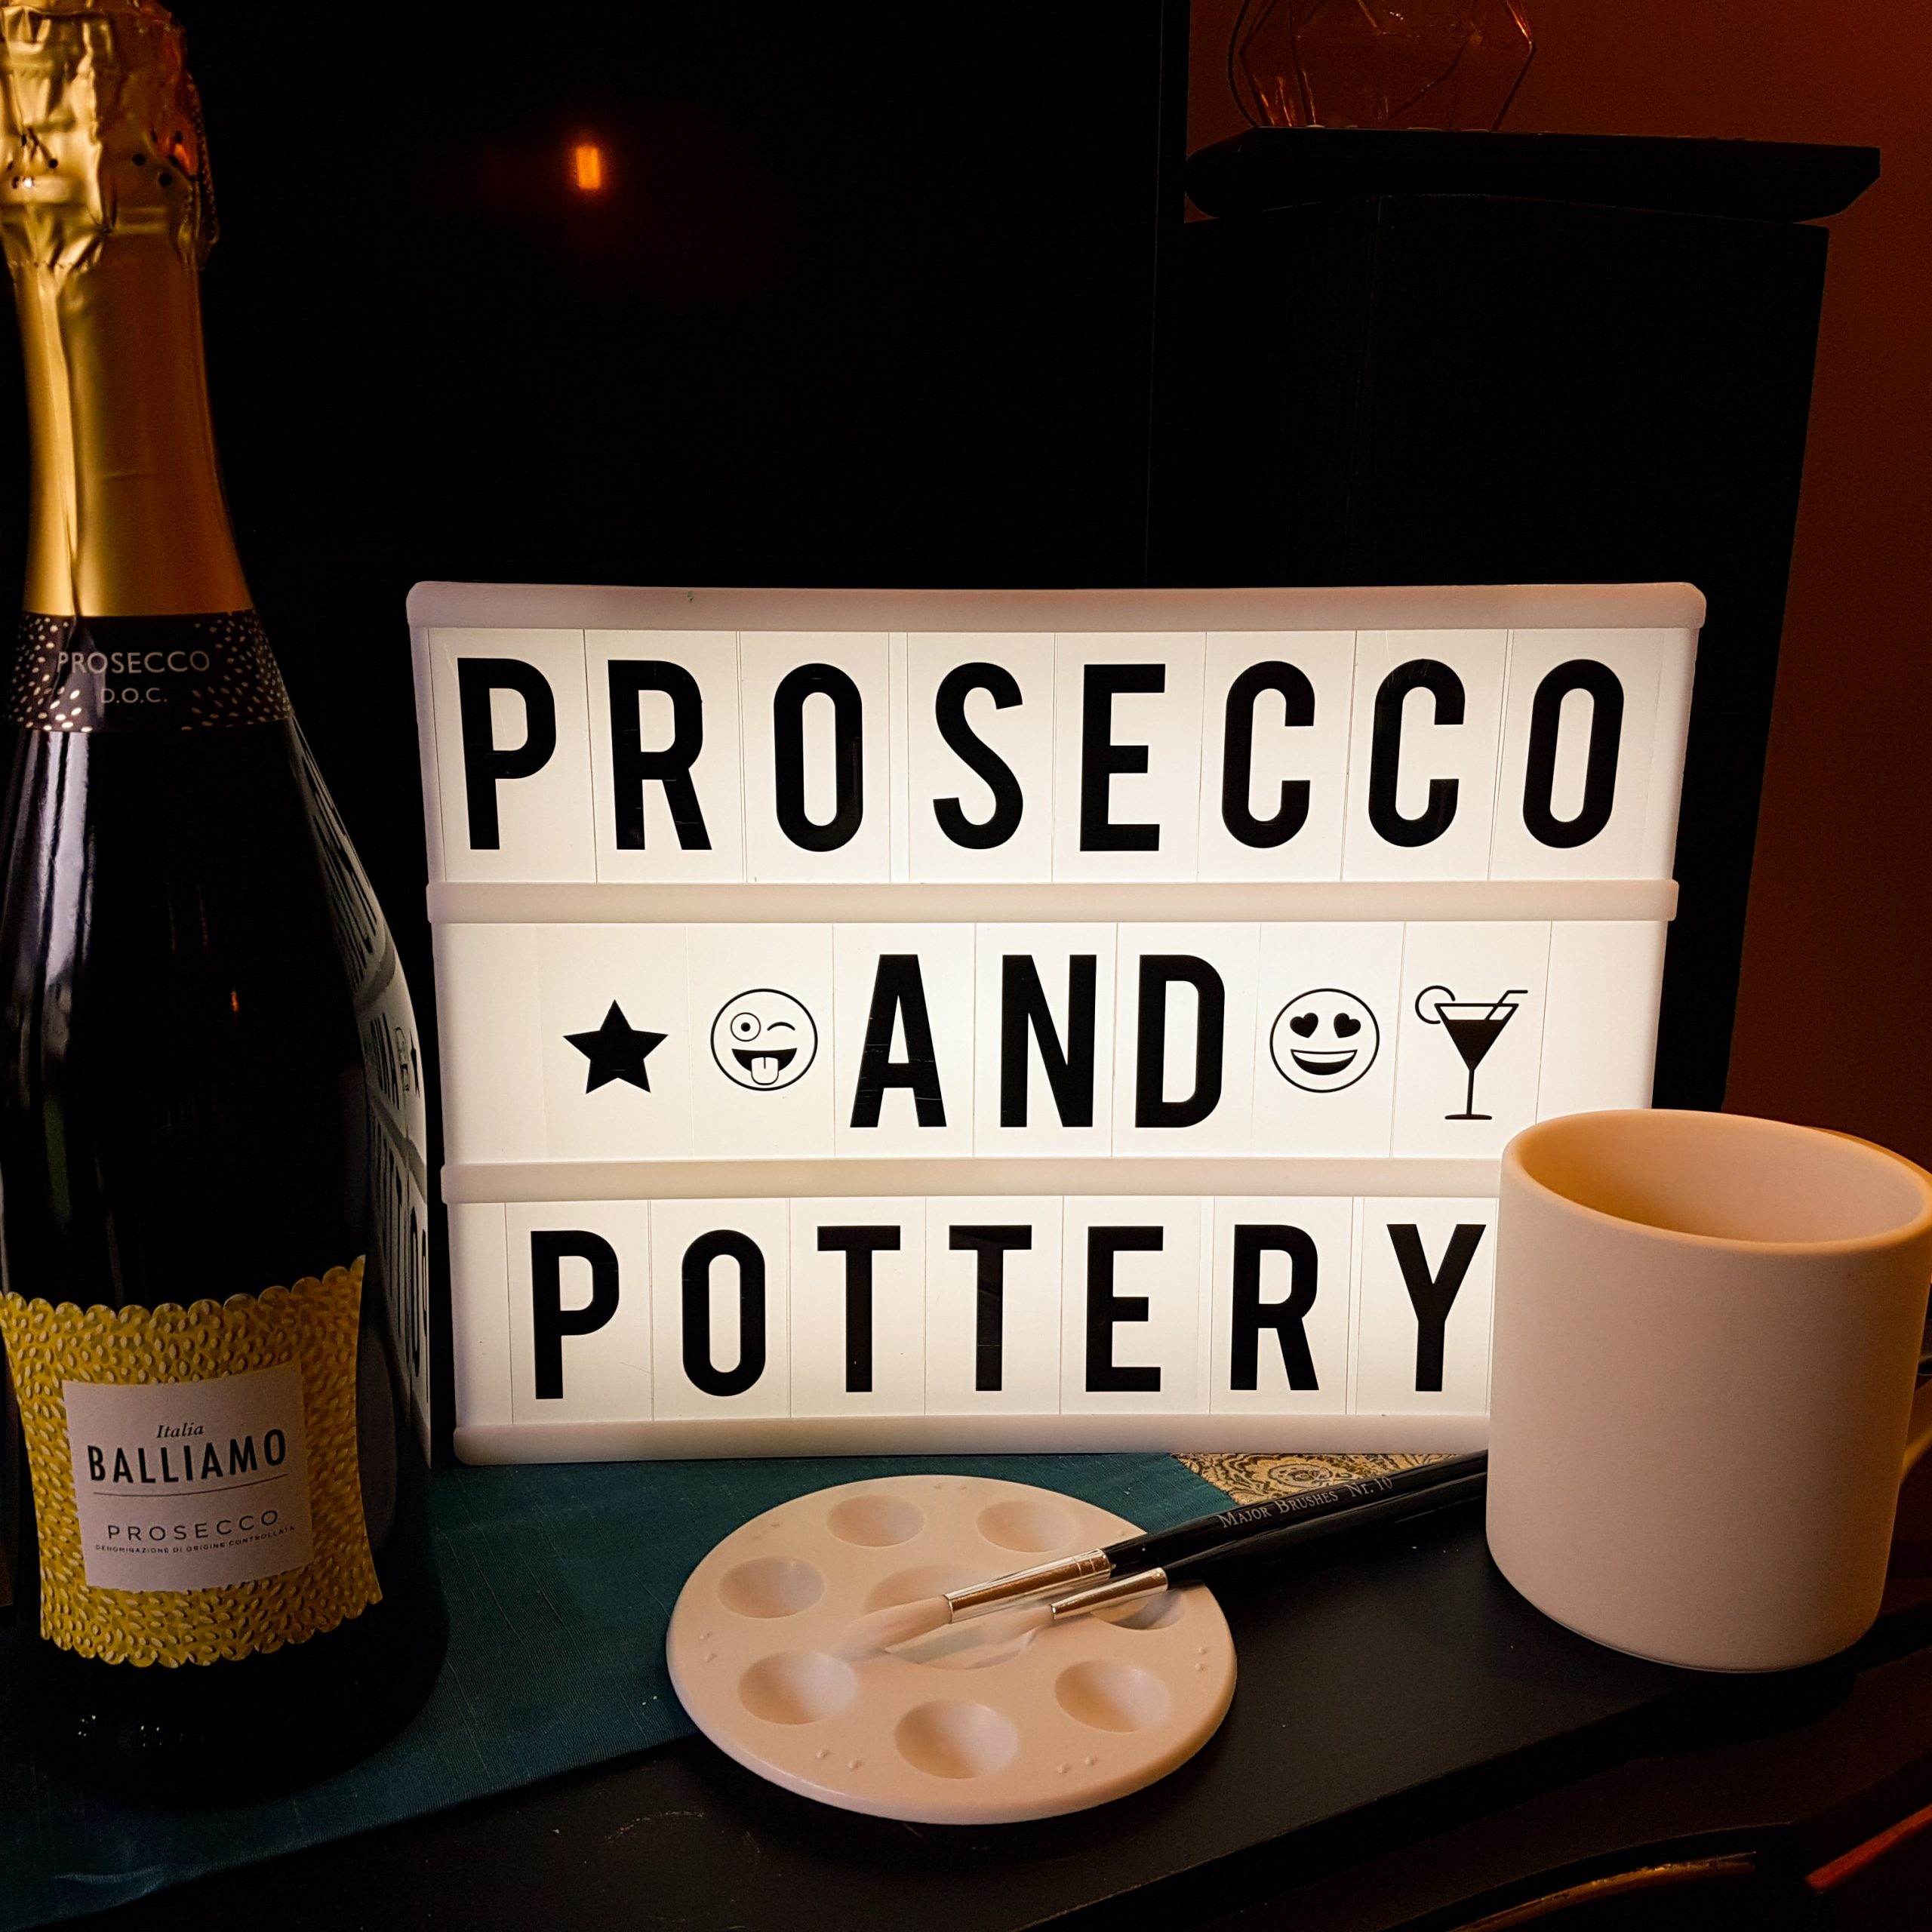 Prosecco and Pottery